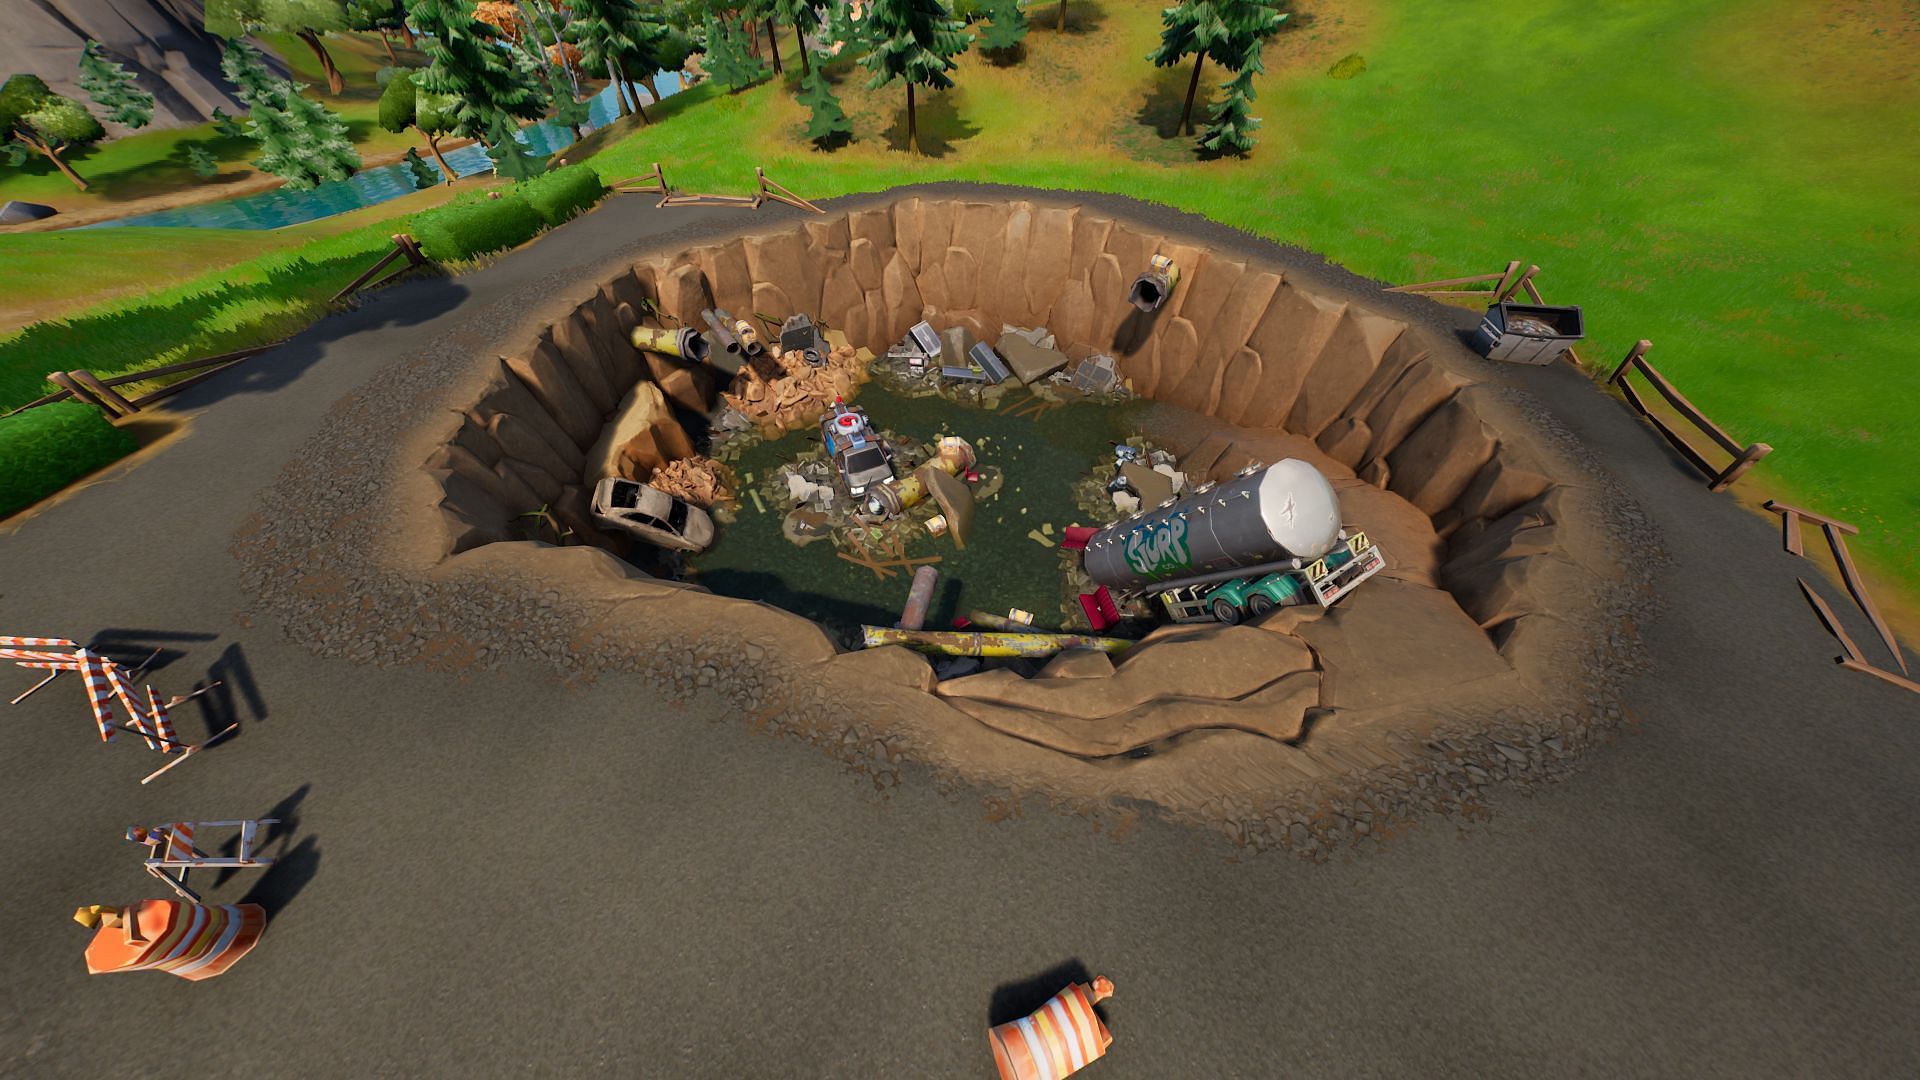 A sinkhole formed near Tilted Towers that brings about several questions (Image via Epic Games)